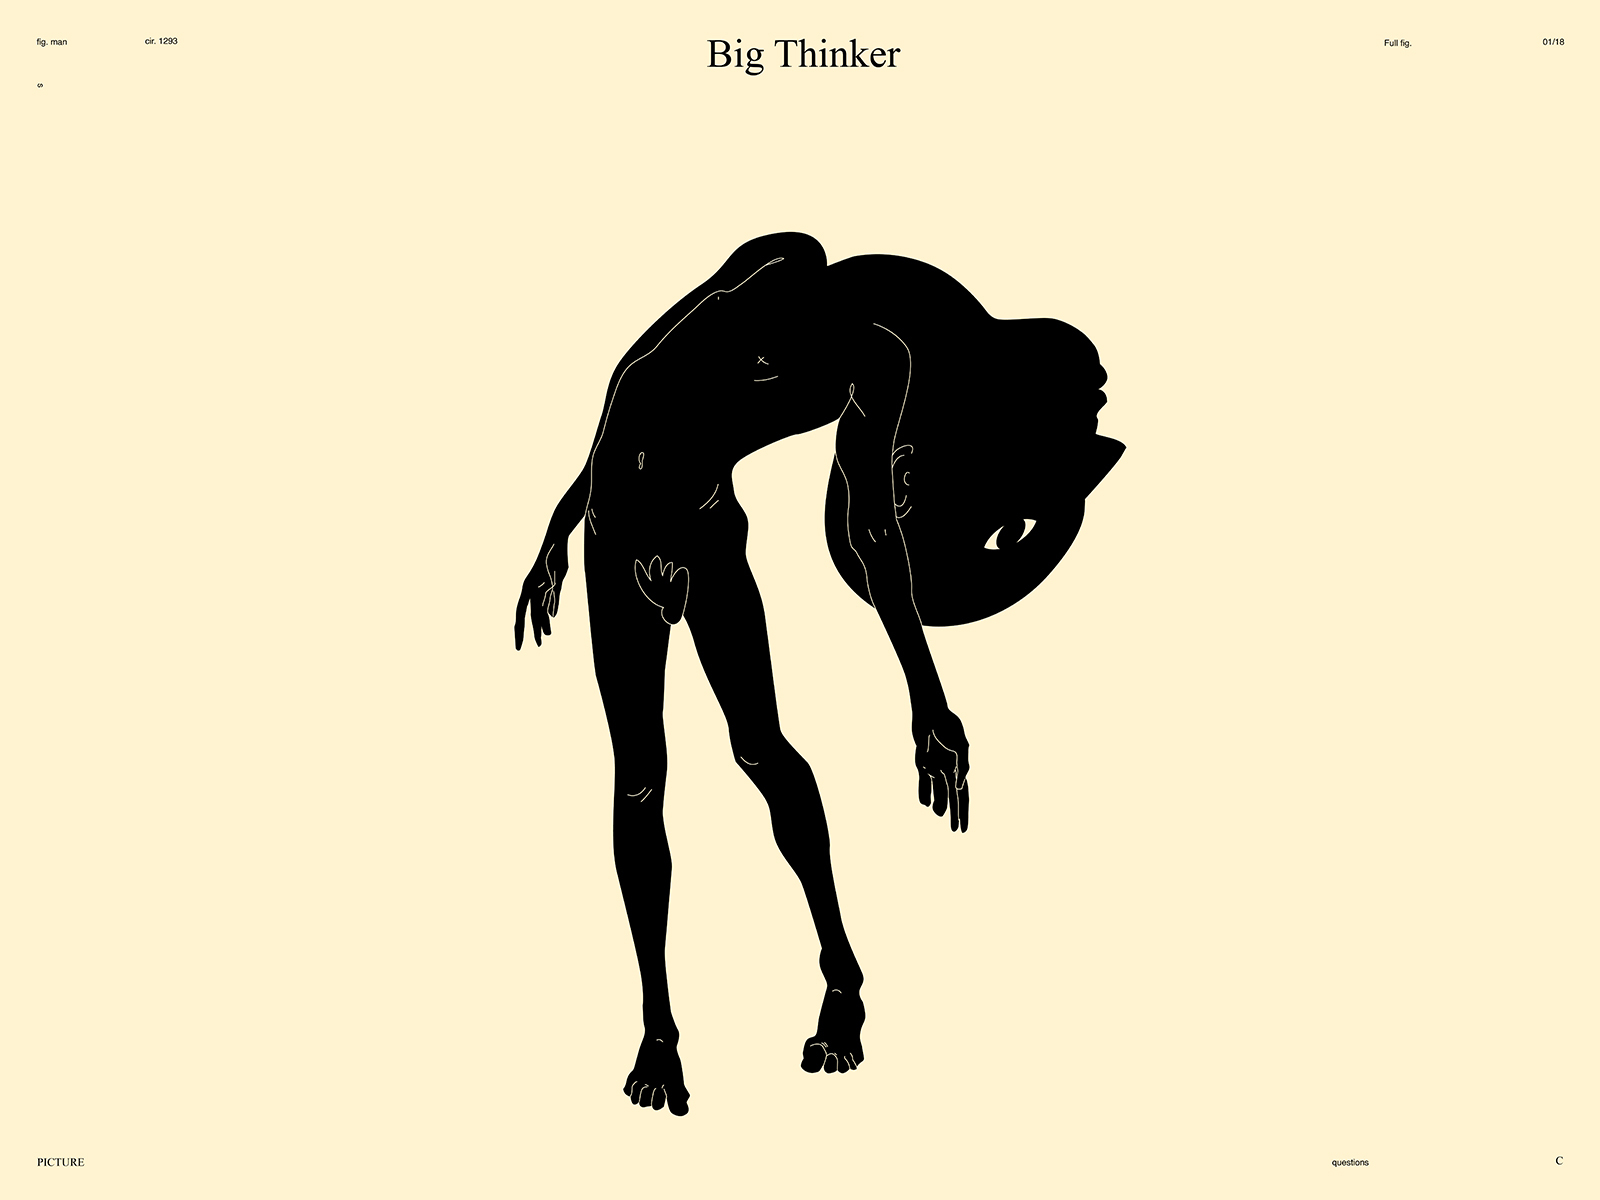 Big Thinker abstract big head body body illustration comedic composition conceptual illustration design figure figure illustration funny head humour illustration laconic lines minimal poster